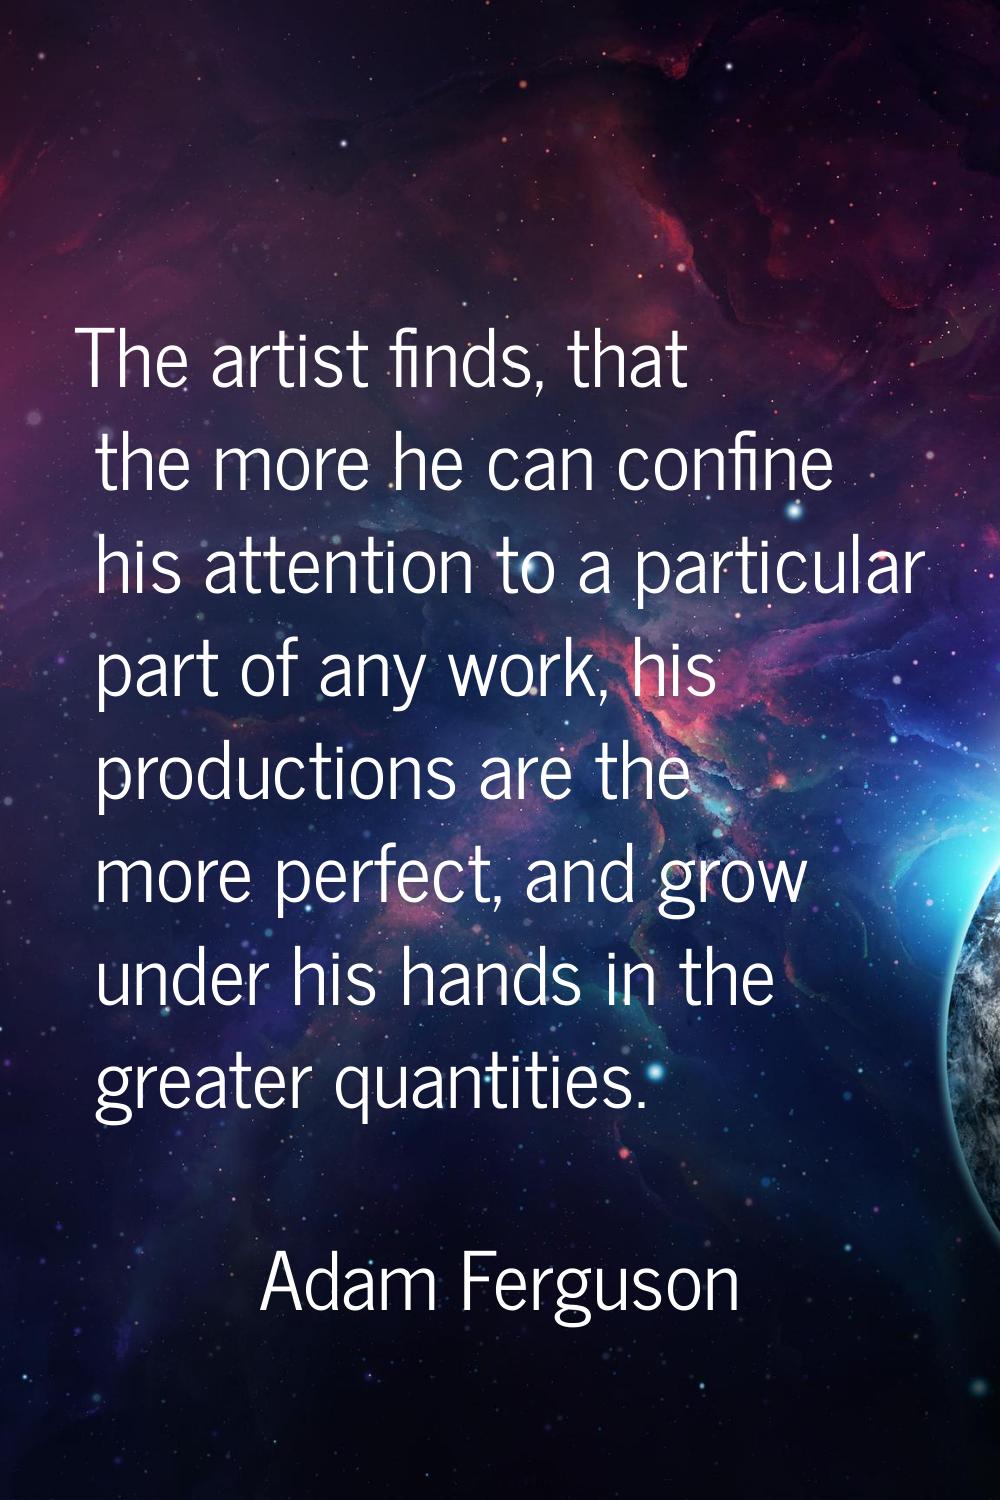 The artist finds, that the more he can confine his attention to a particular part of any work, his 